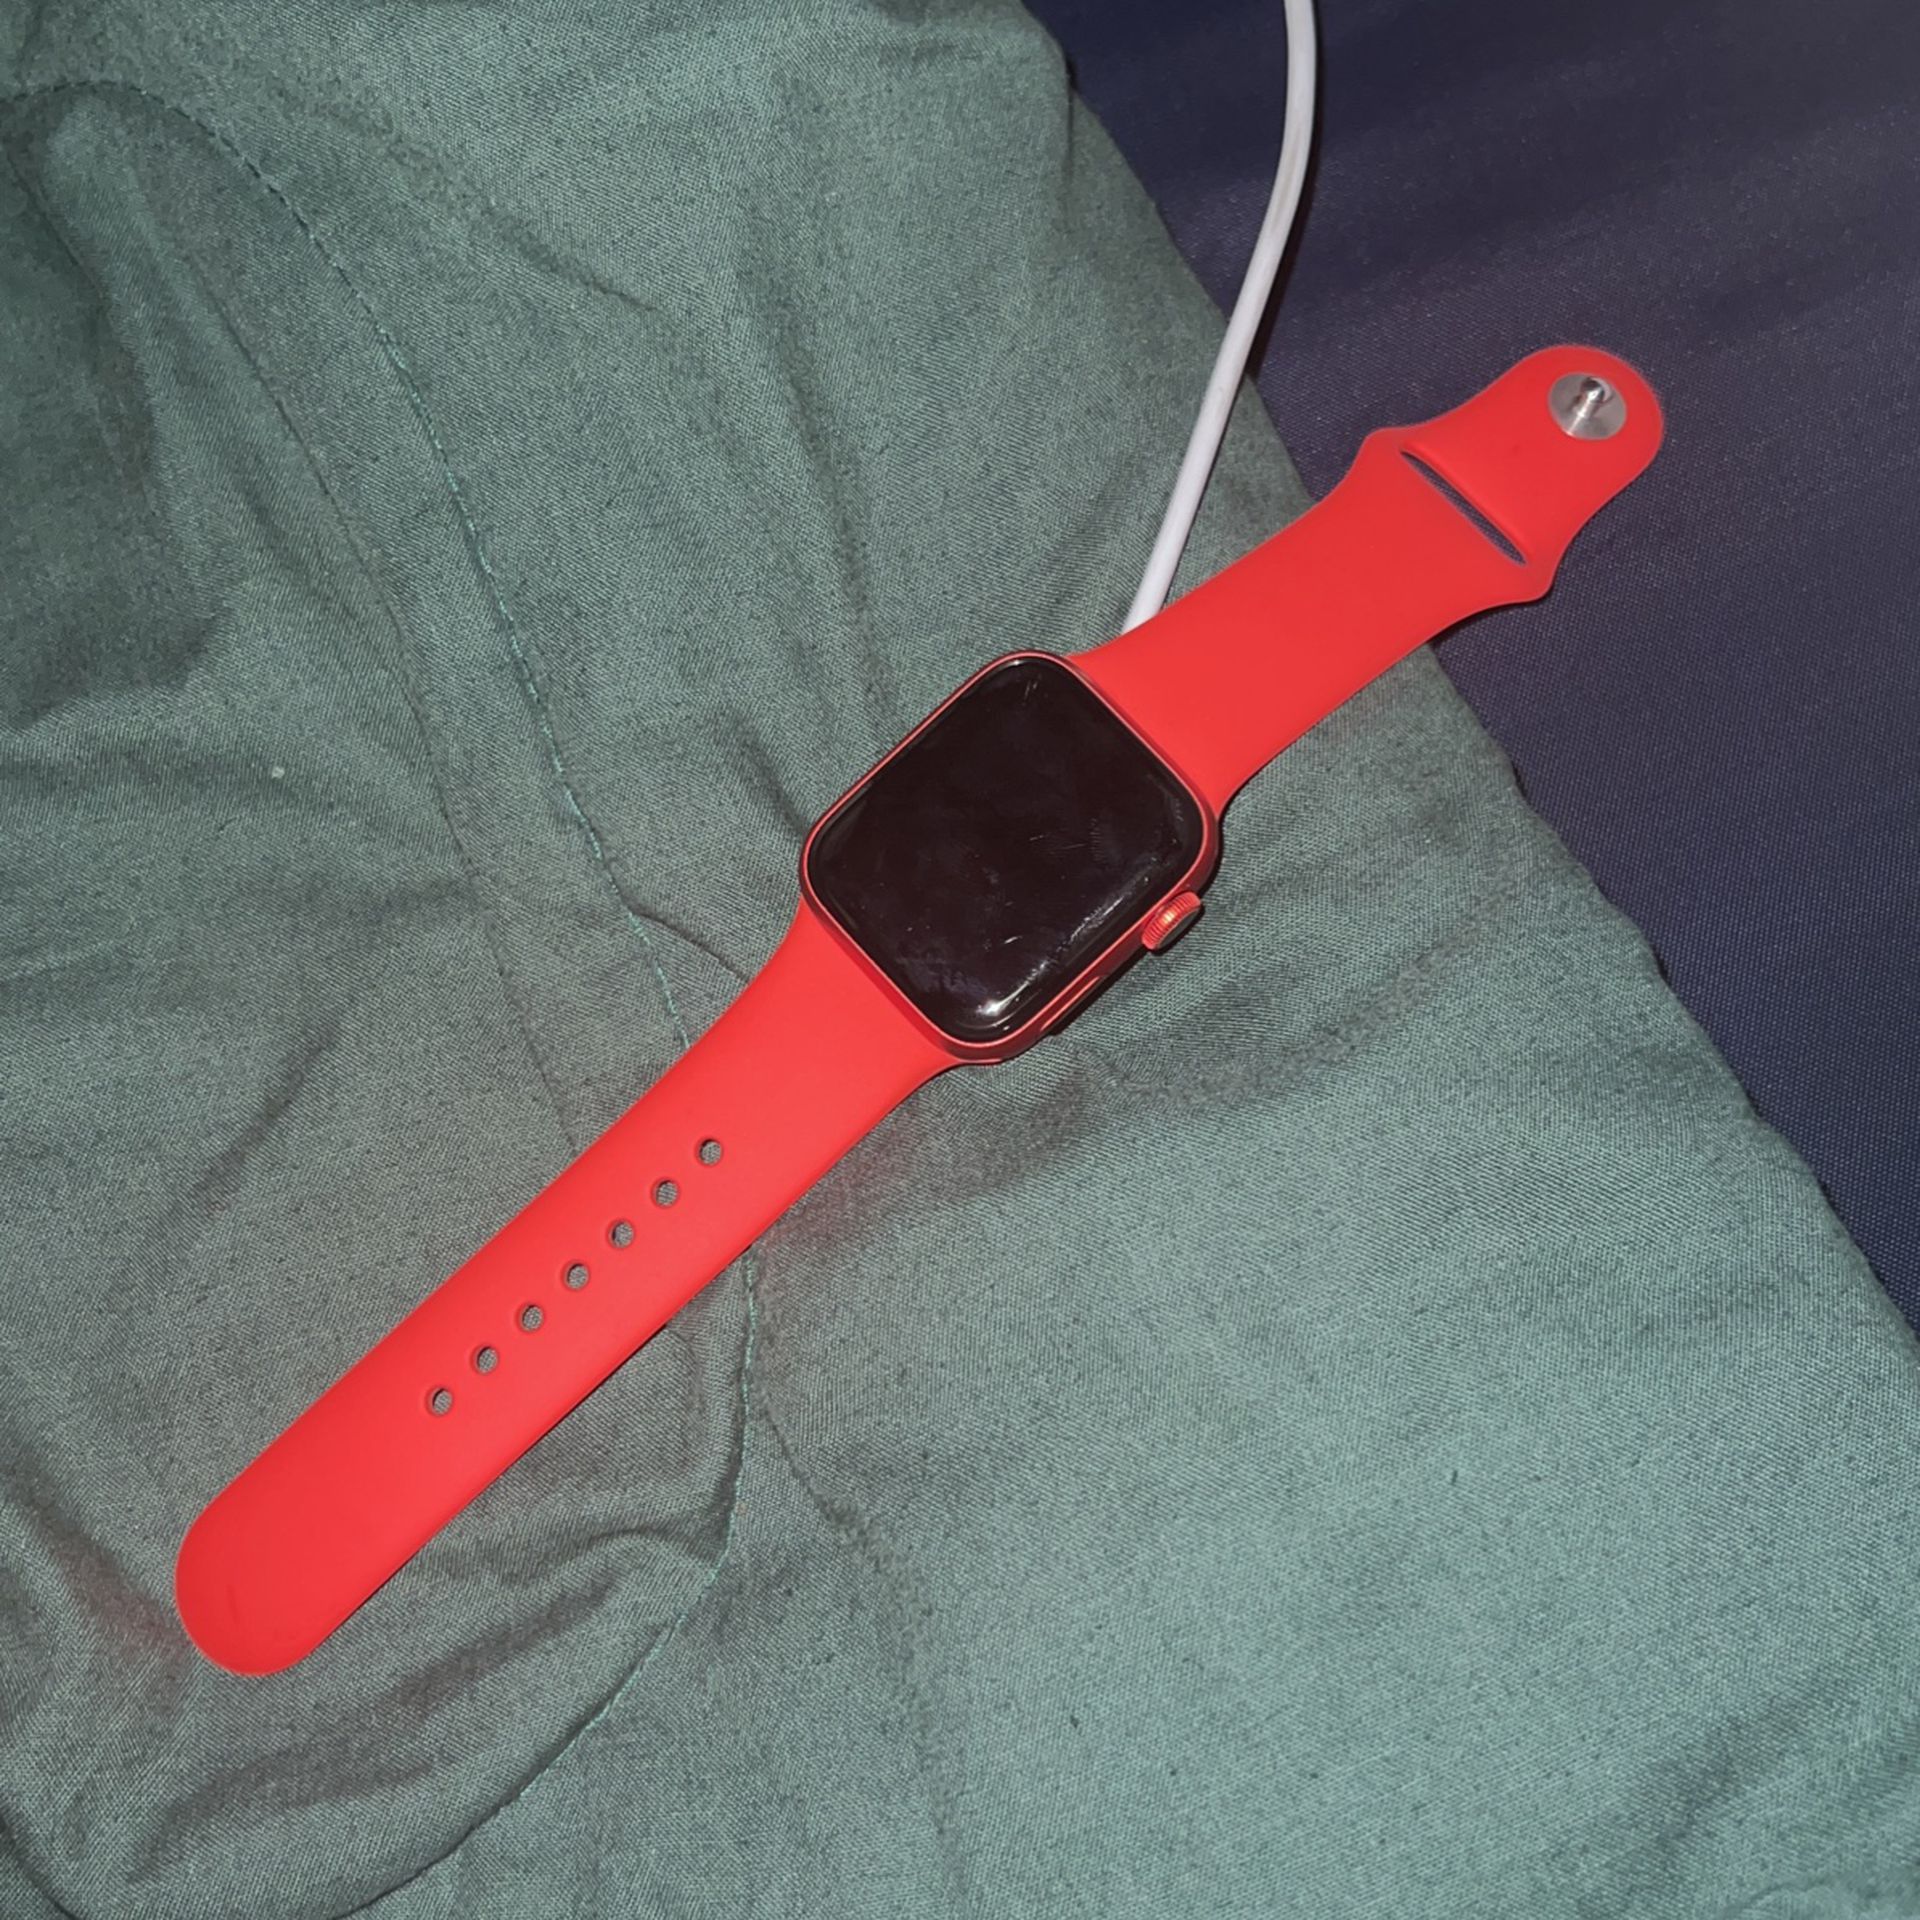 Apple Watch Series 6 Product Red 40mm GPS for Sale in Clearfield